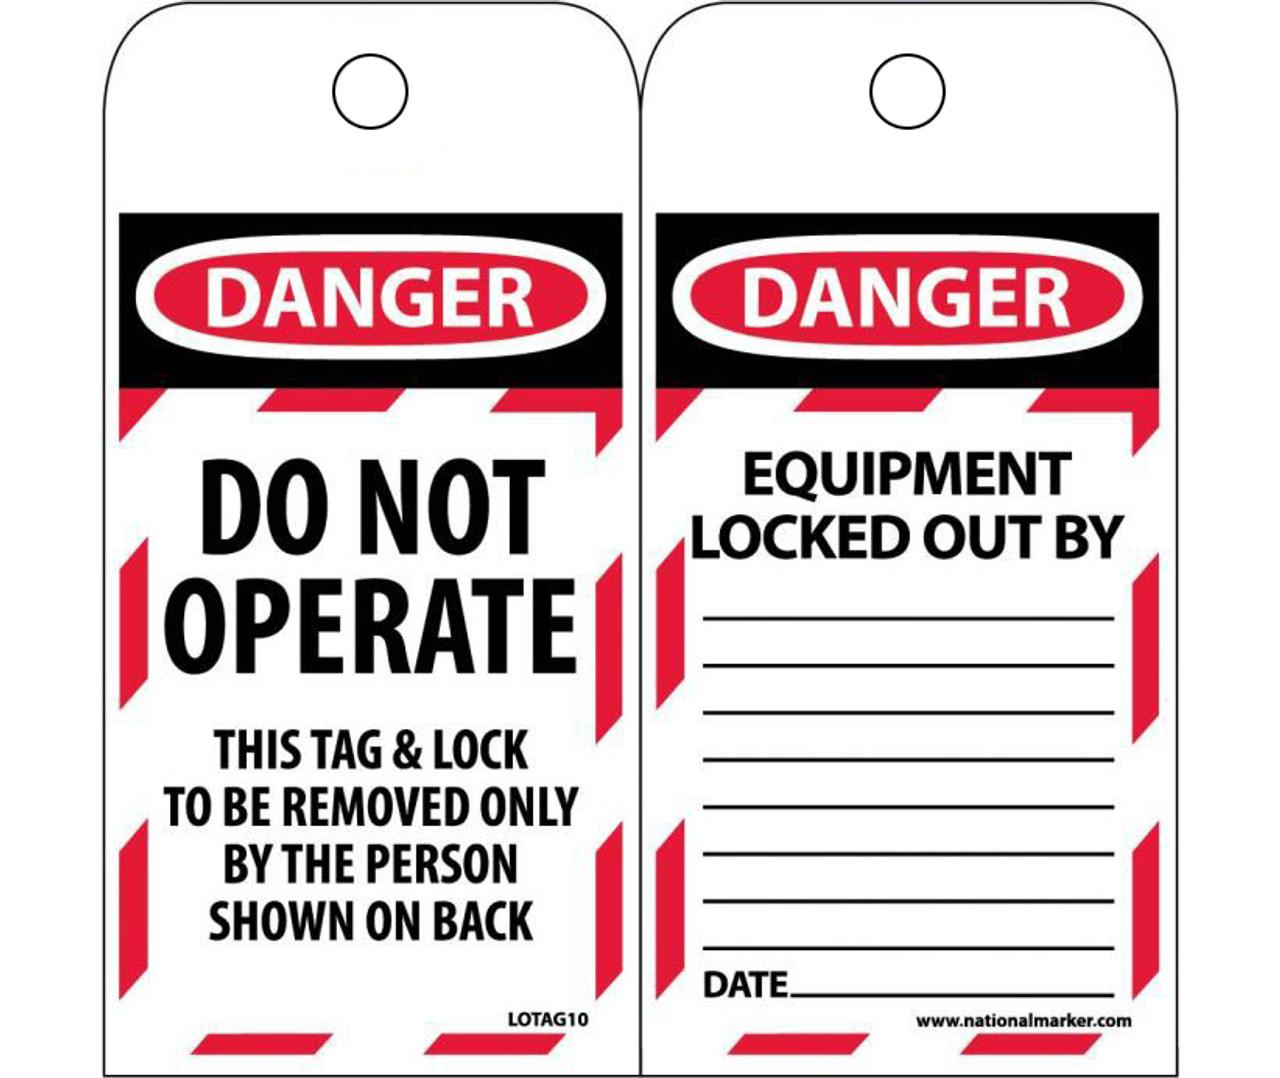 lockout-tagout-vinyl-tags-pack-of-25-g-s-safety-products